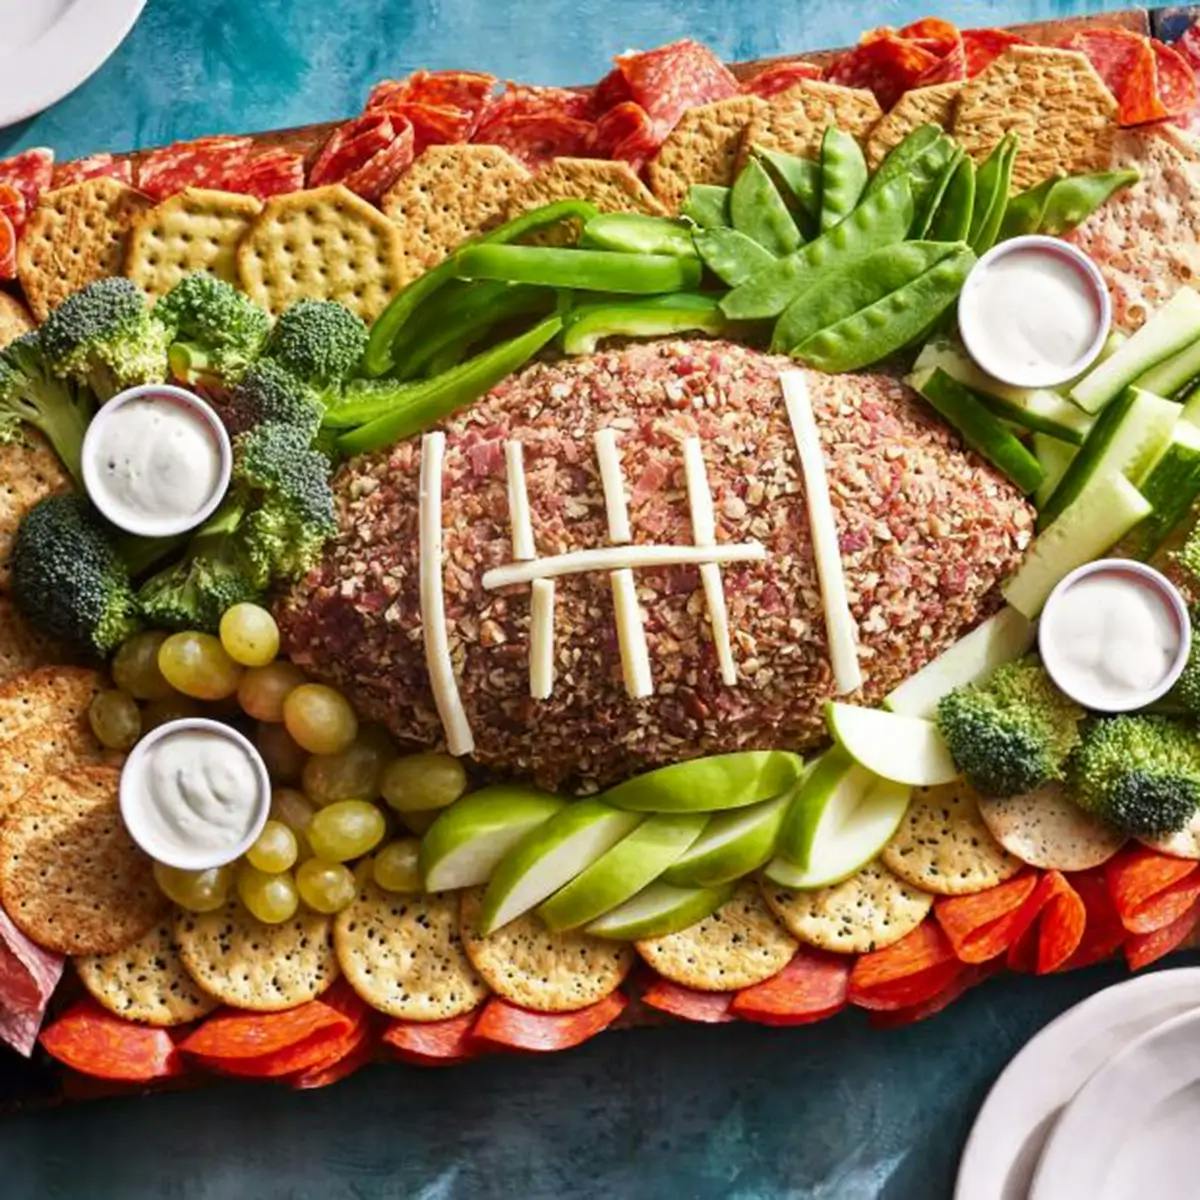 A cheese ball shaped like a football for Super Bowl Sunday, surrounded by a charcuterie board of vegetables and crackers.